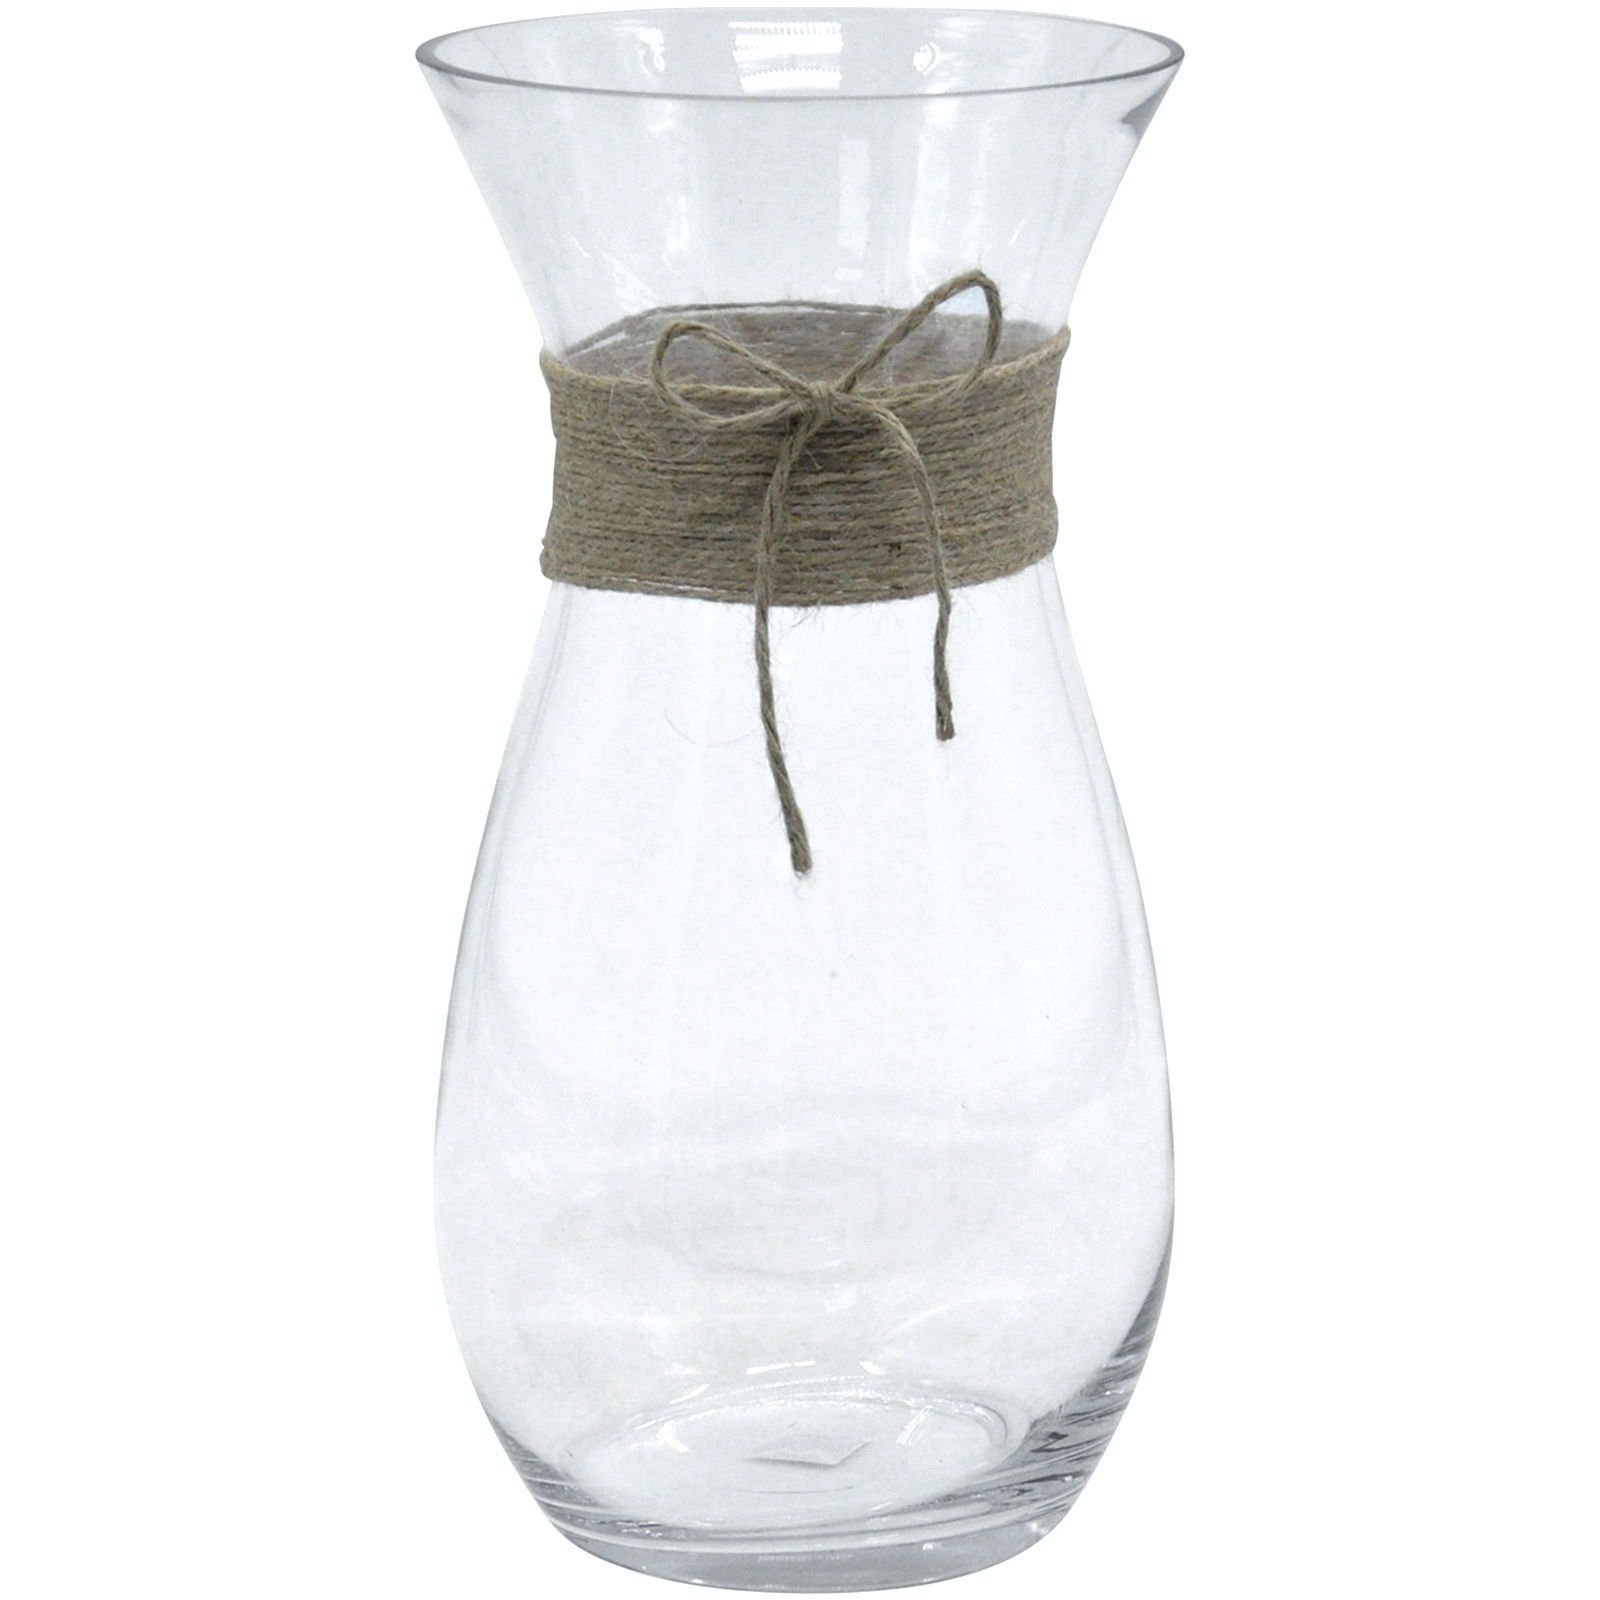 20 Stylish Round Clear Glass Vase 2024 free download round clear glass vase of clear vases www topsimages com in clear vase with rope at home jpg 1268x1268 clear vases